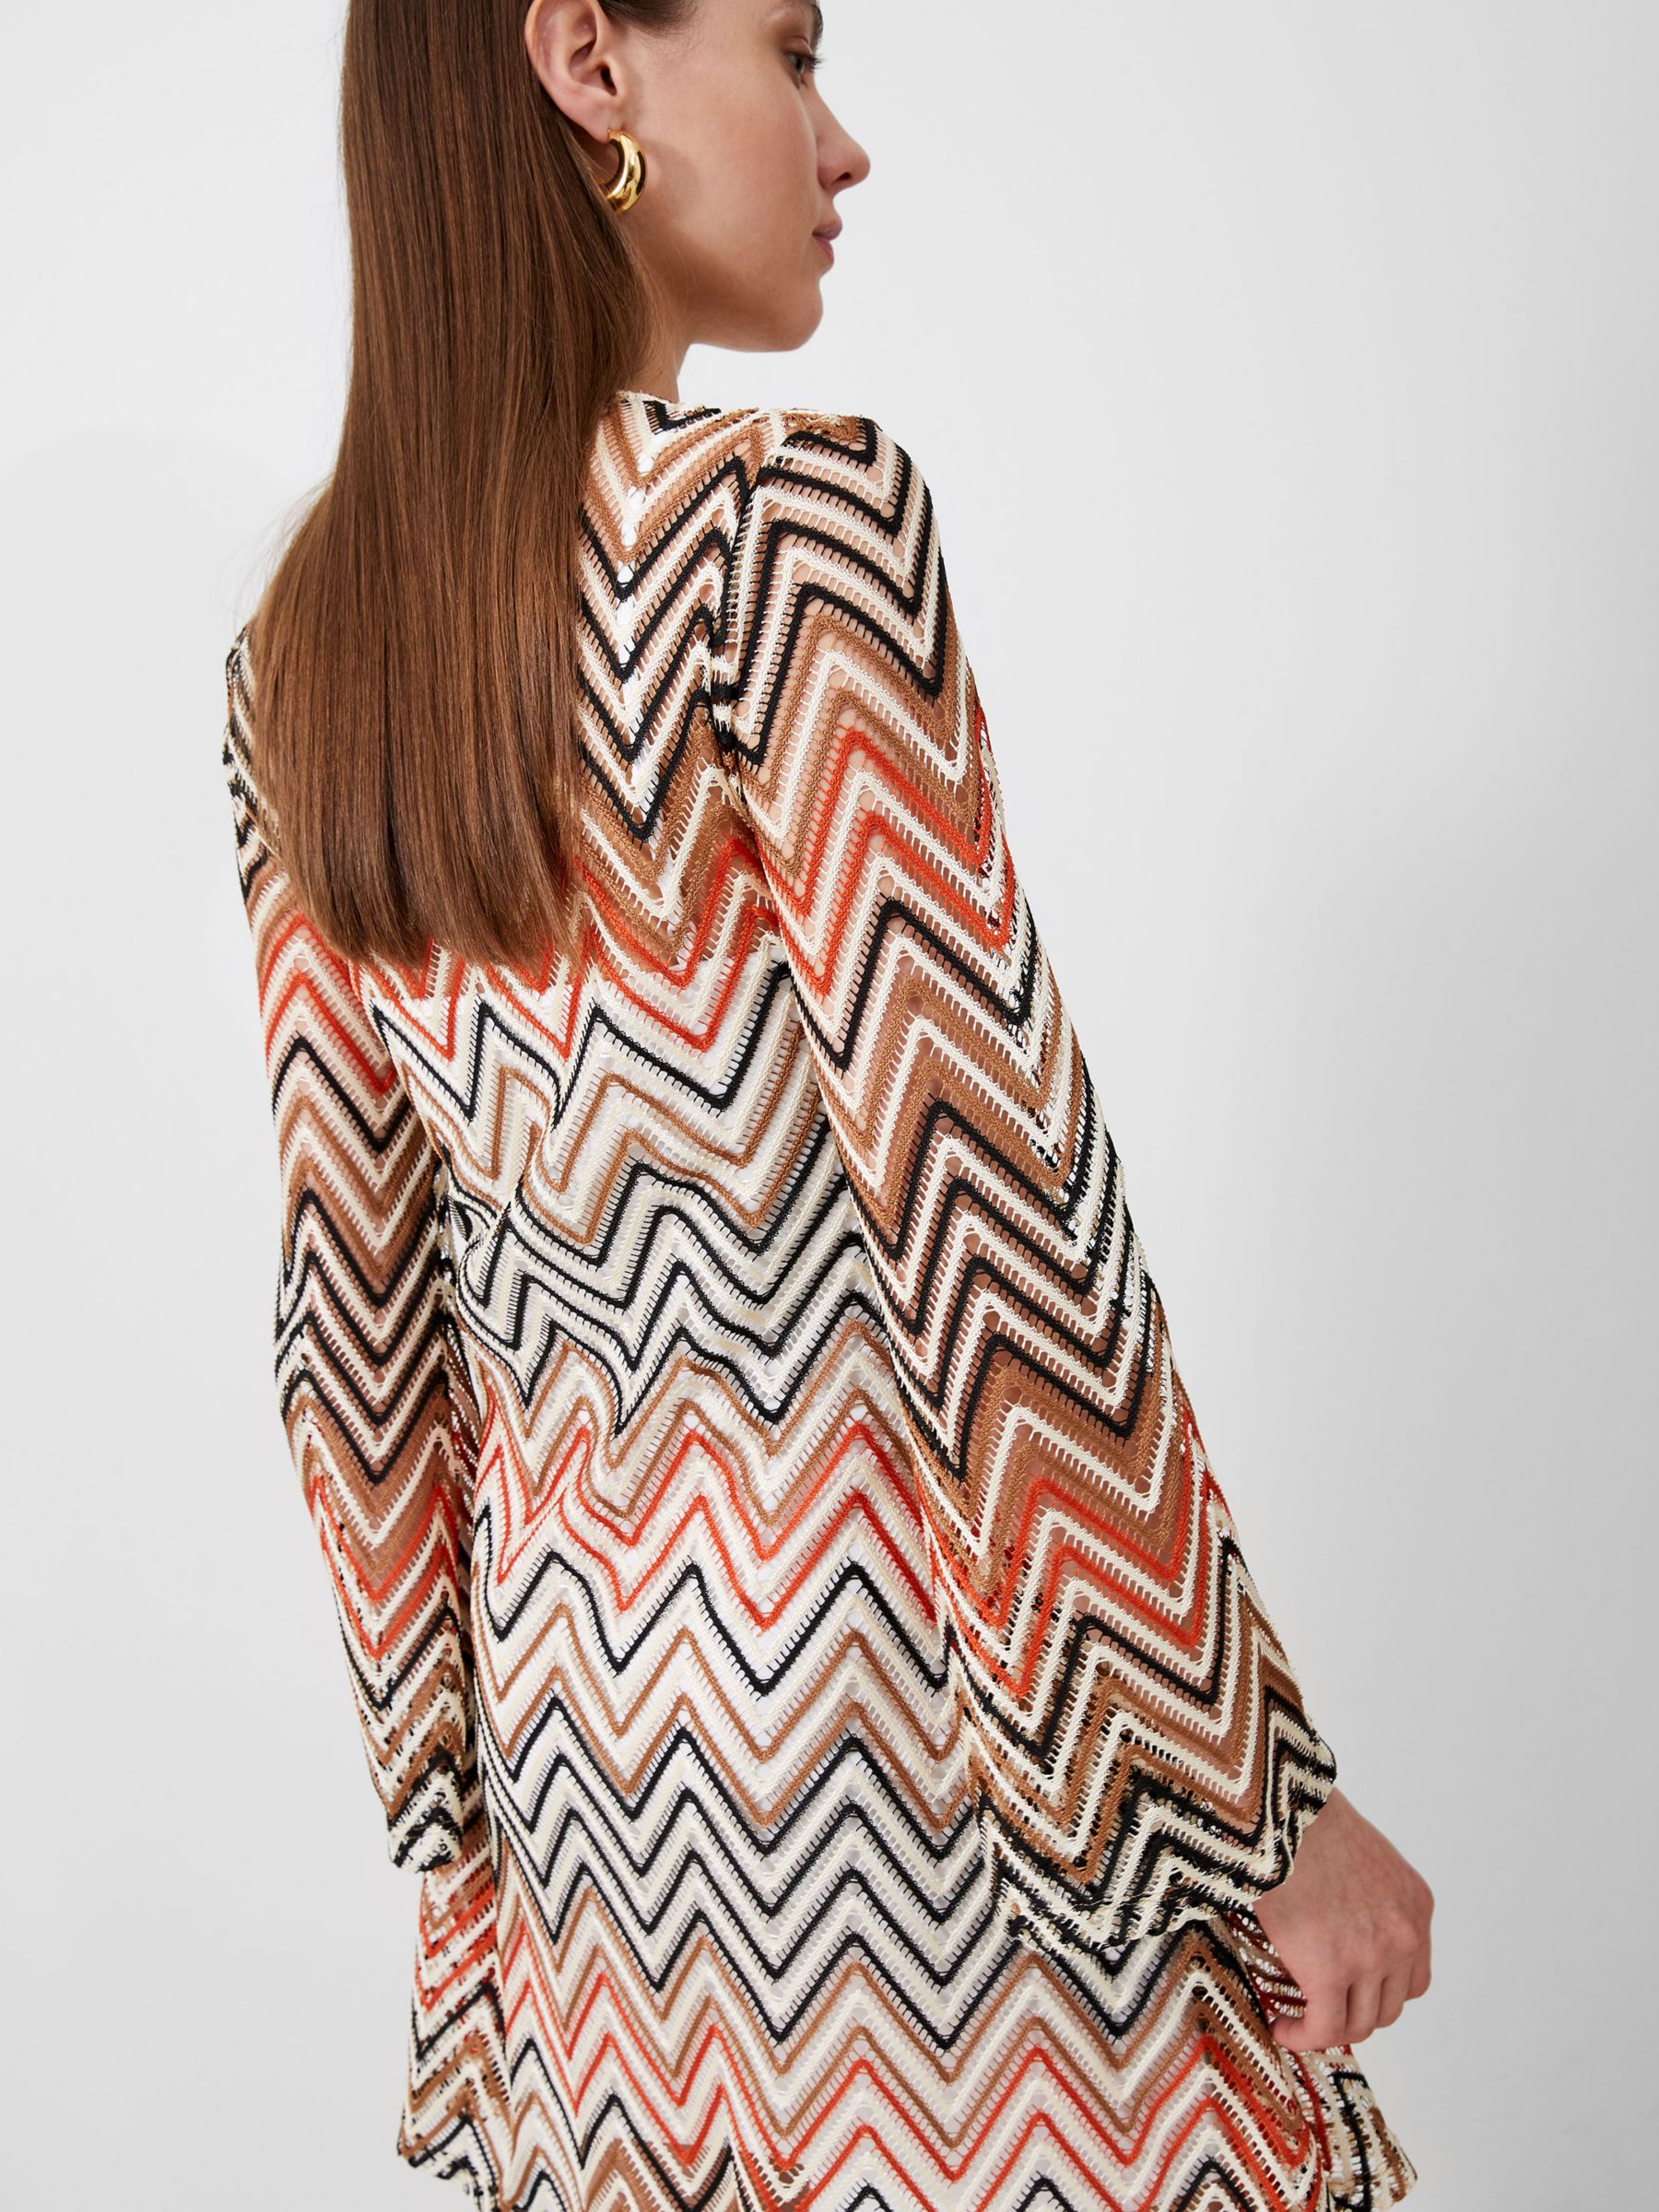 Buy French Connection Rudy Textured Zig Zag Stripe Mini Dress, Pear/Multi Online at johnlewis.com